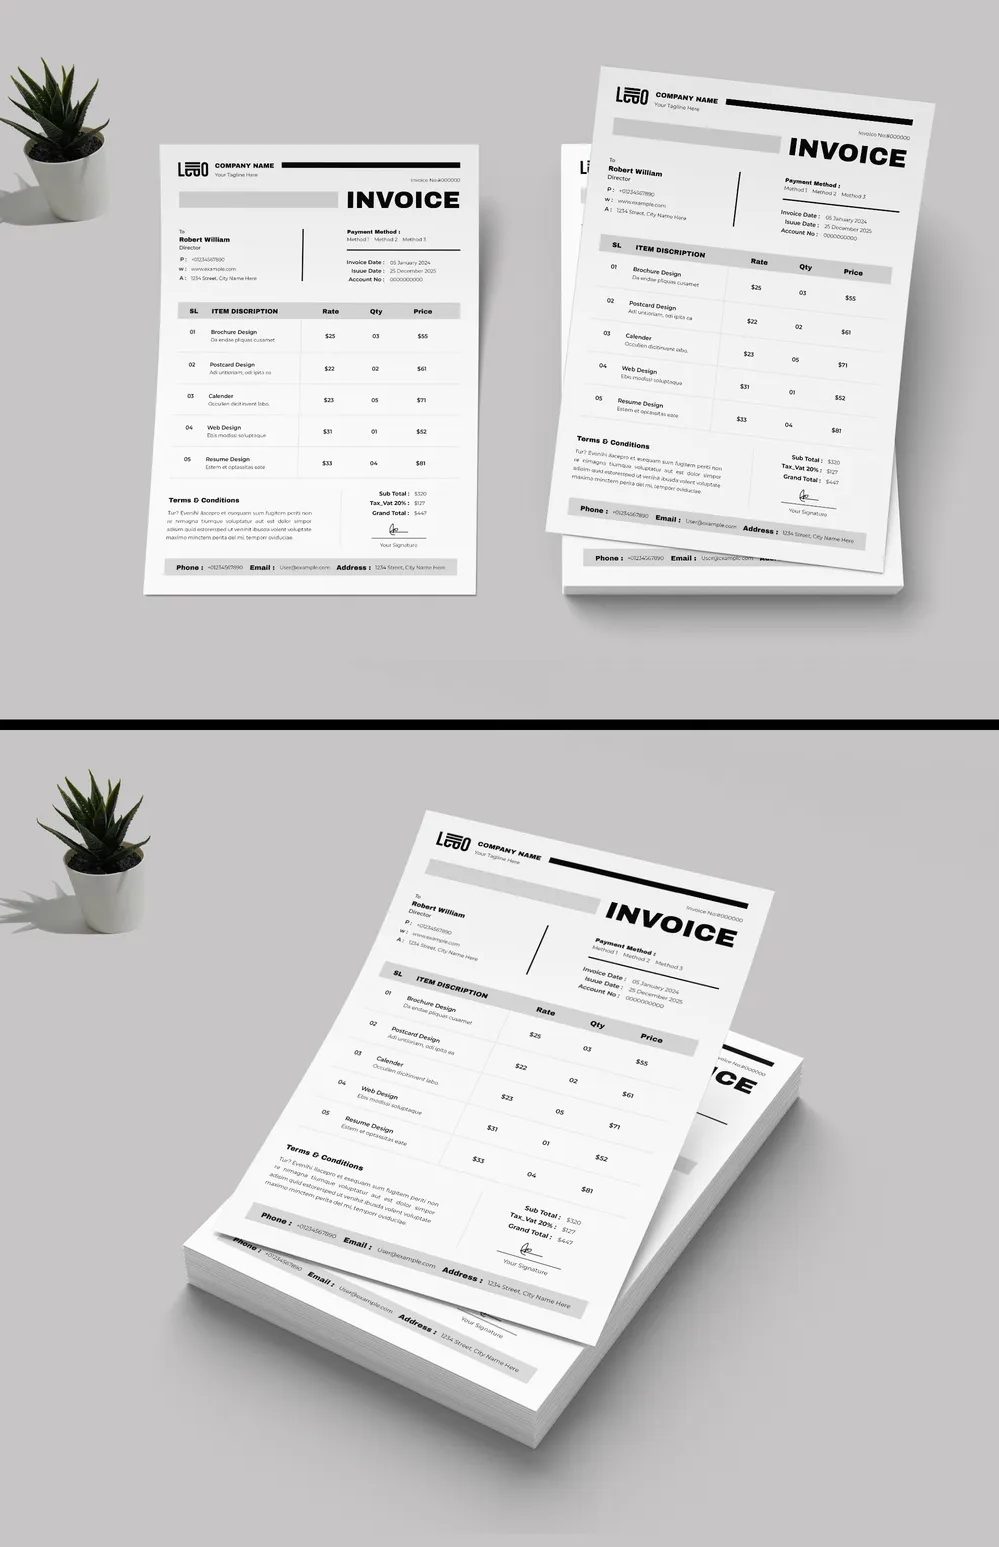 Adobestock - Business Invoice Template Layout 738487344